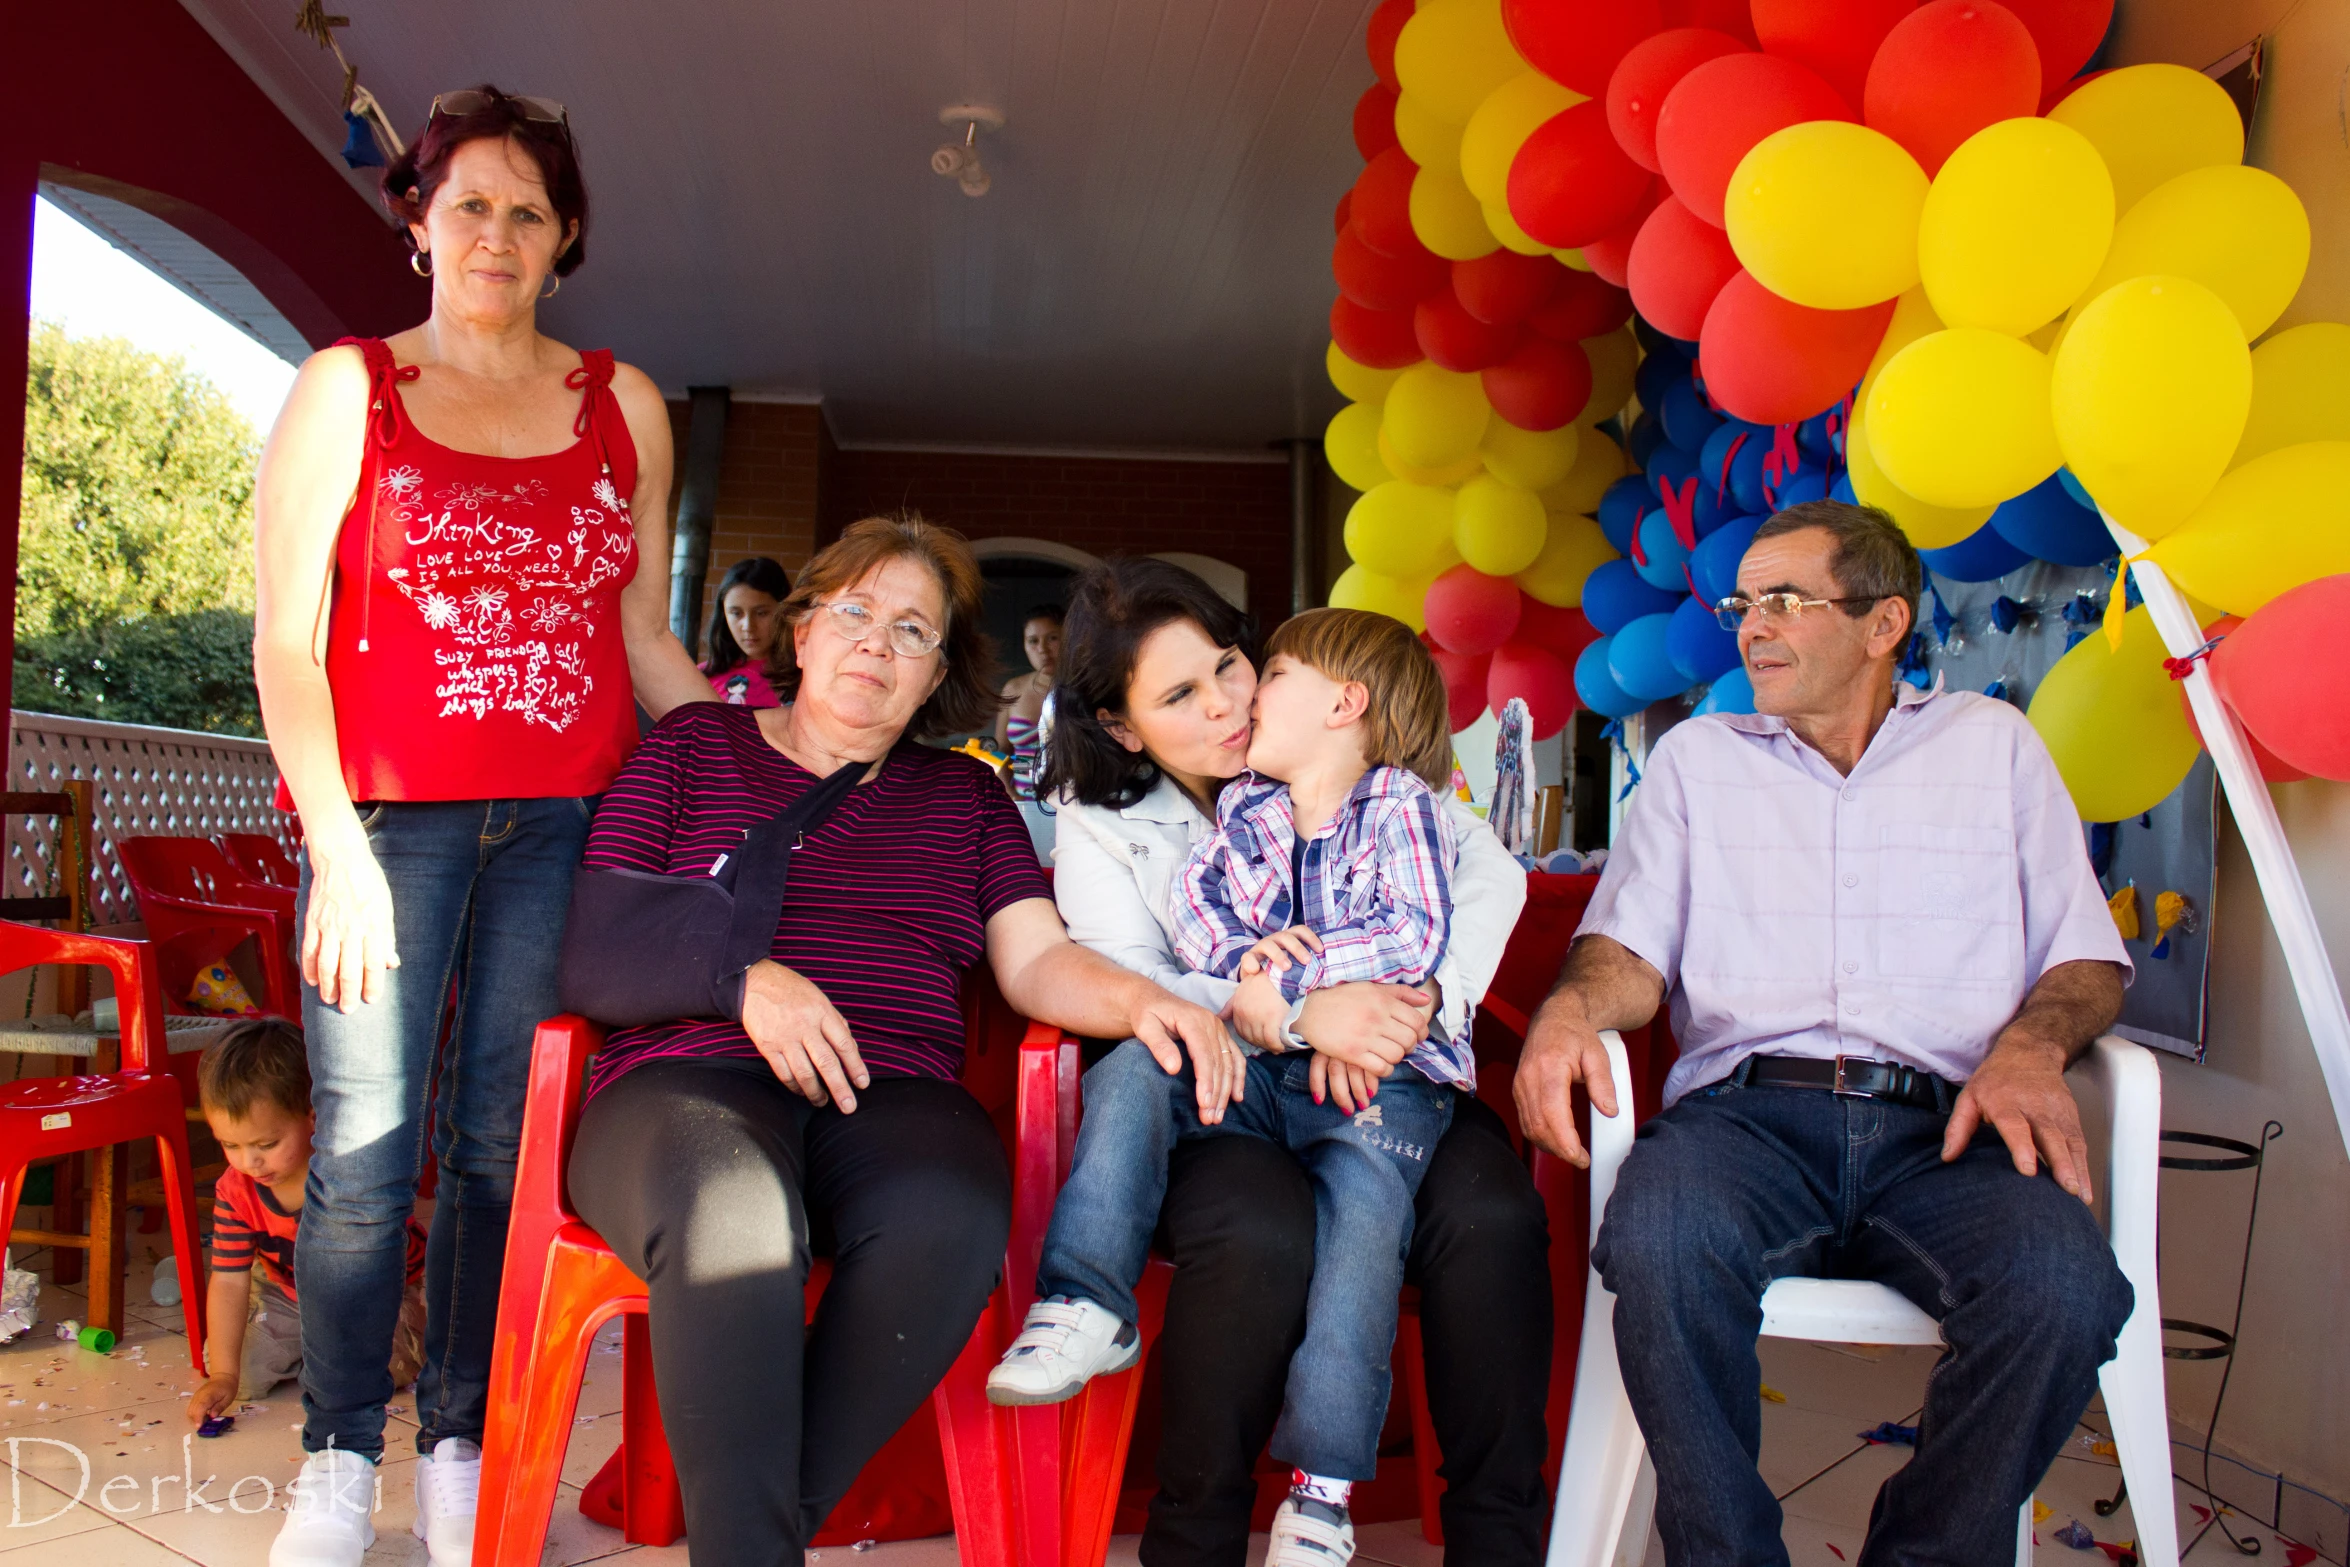 the family poses in their red chair with their balloons hanging overhead